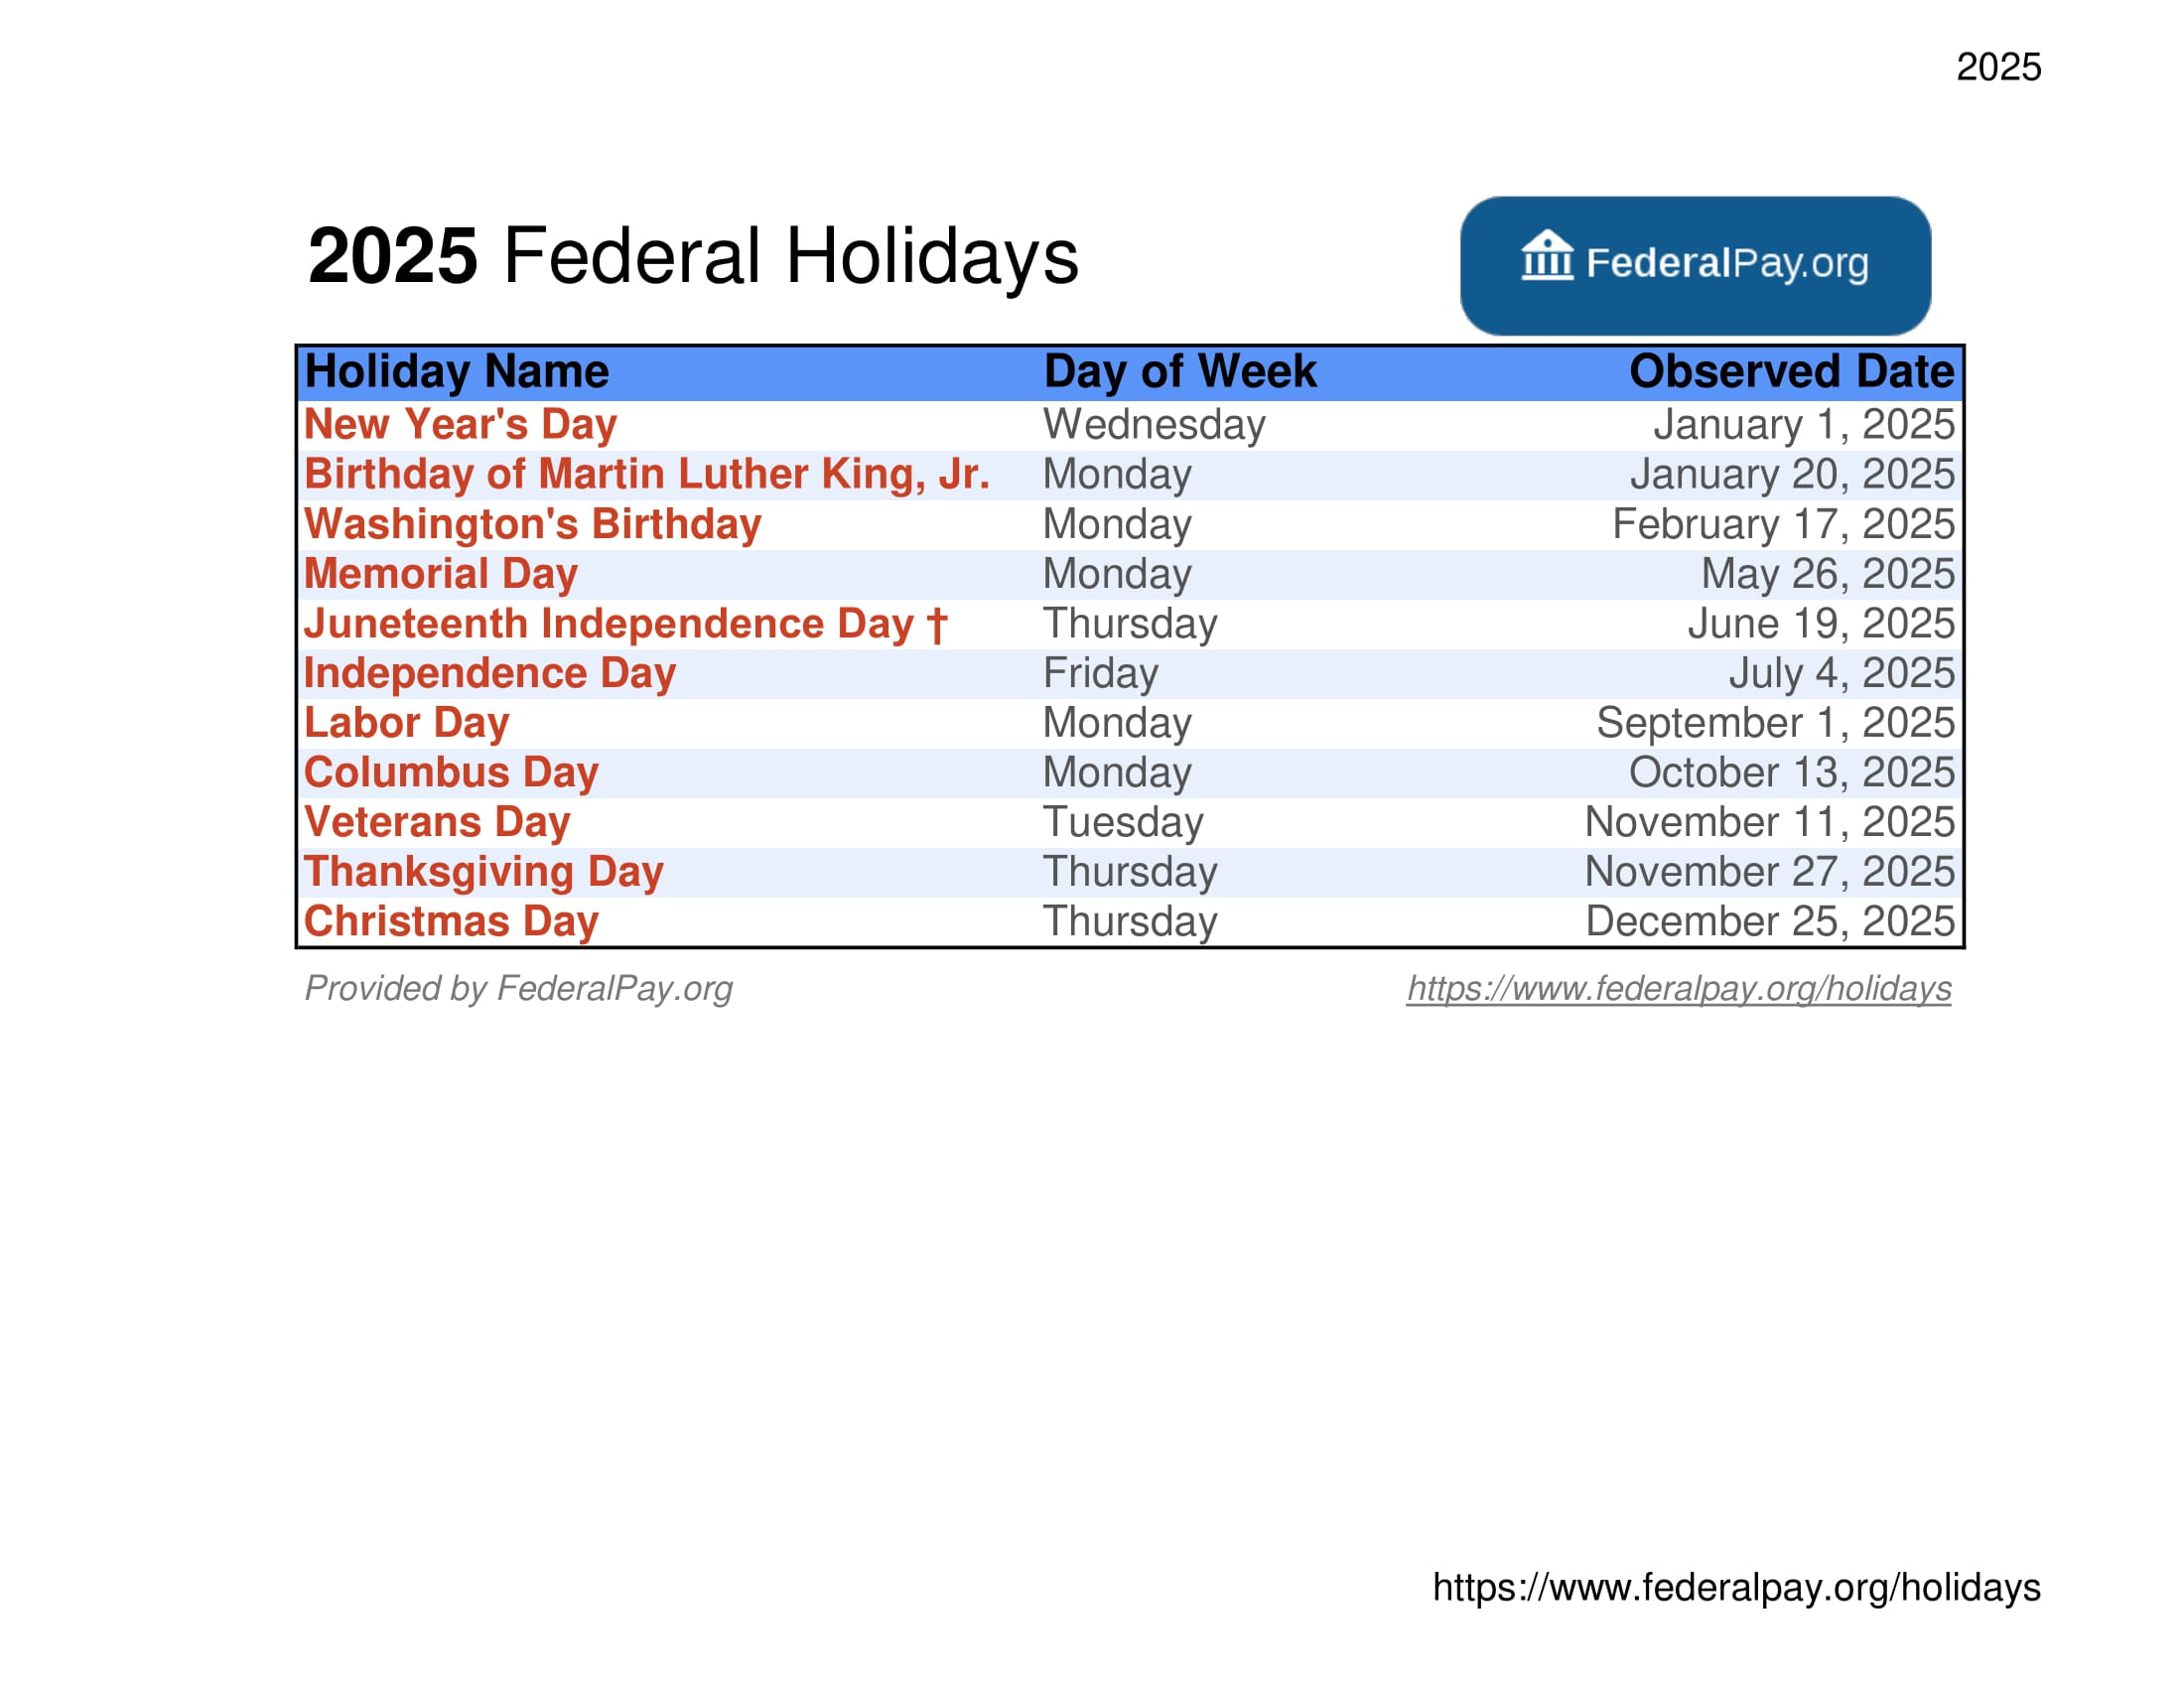 List of Federal Holidays for 2024 and 2025